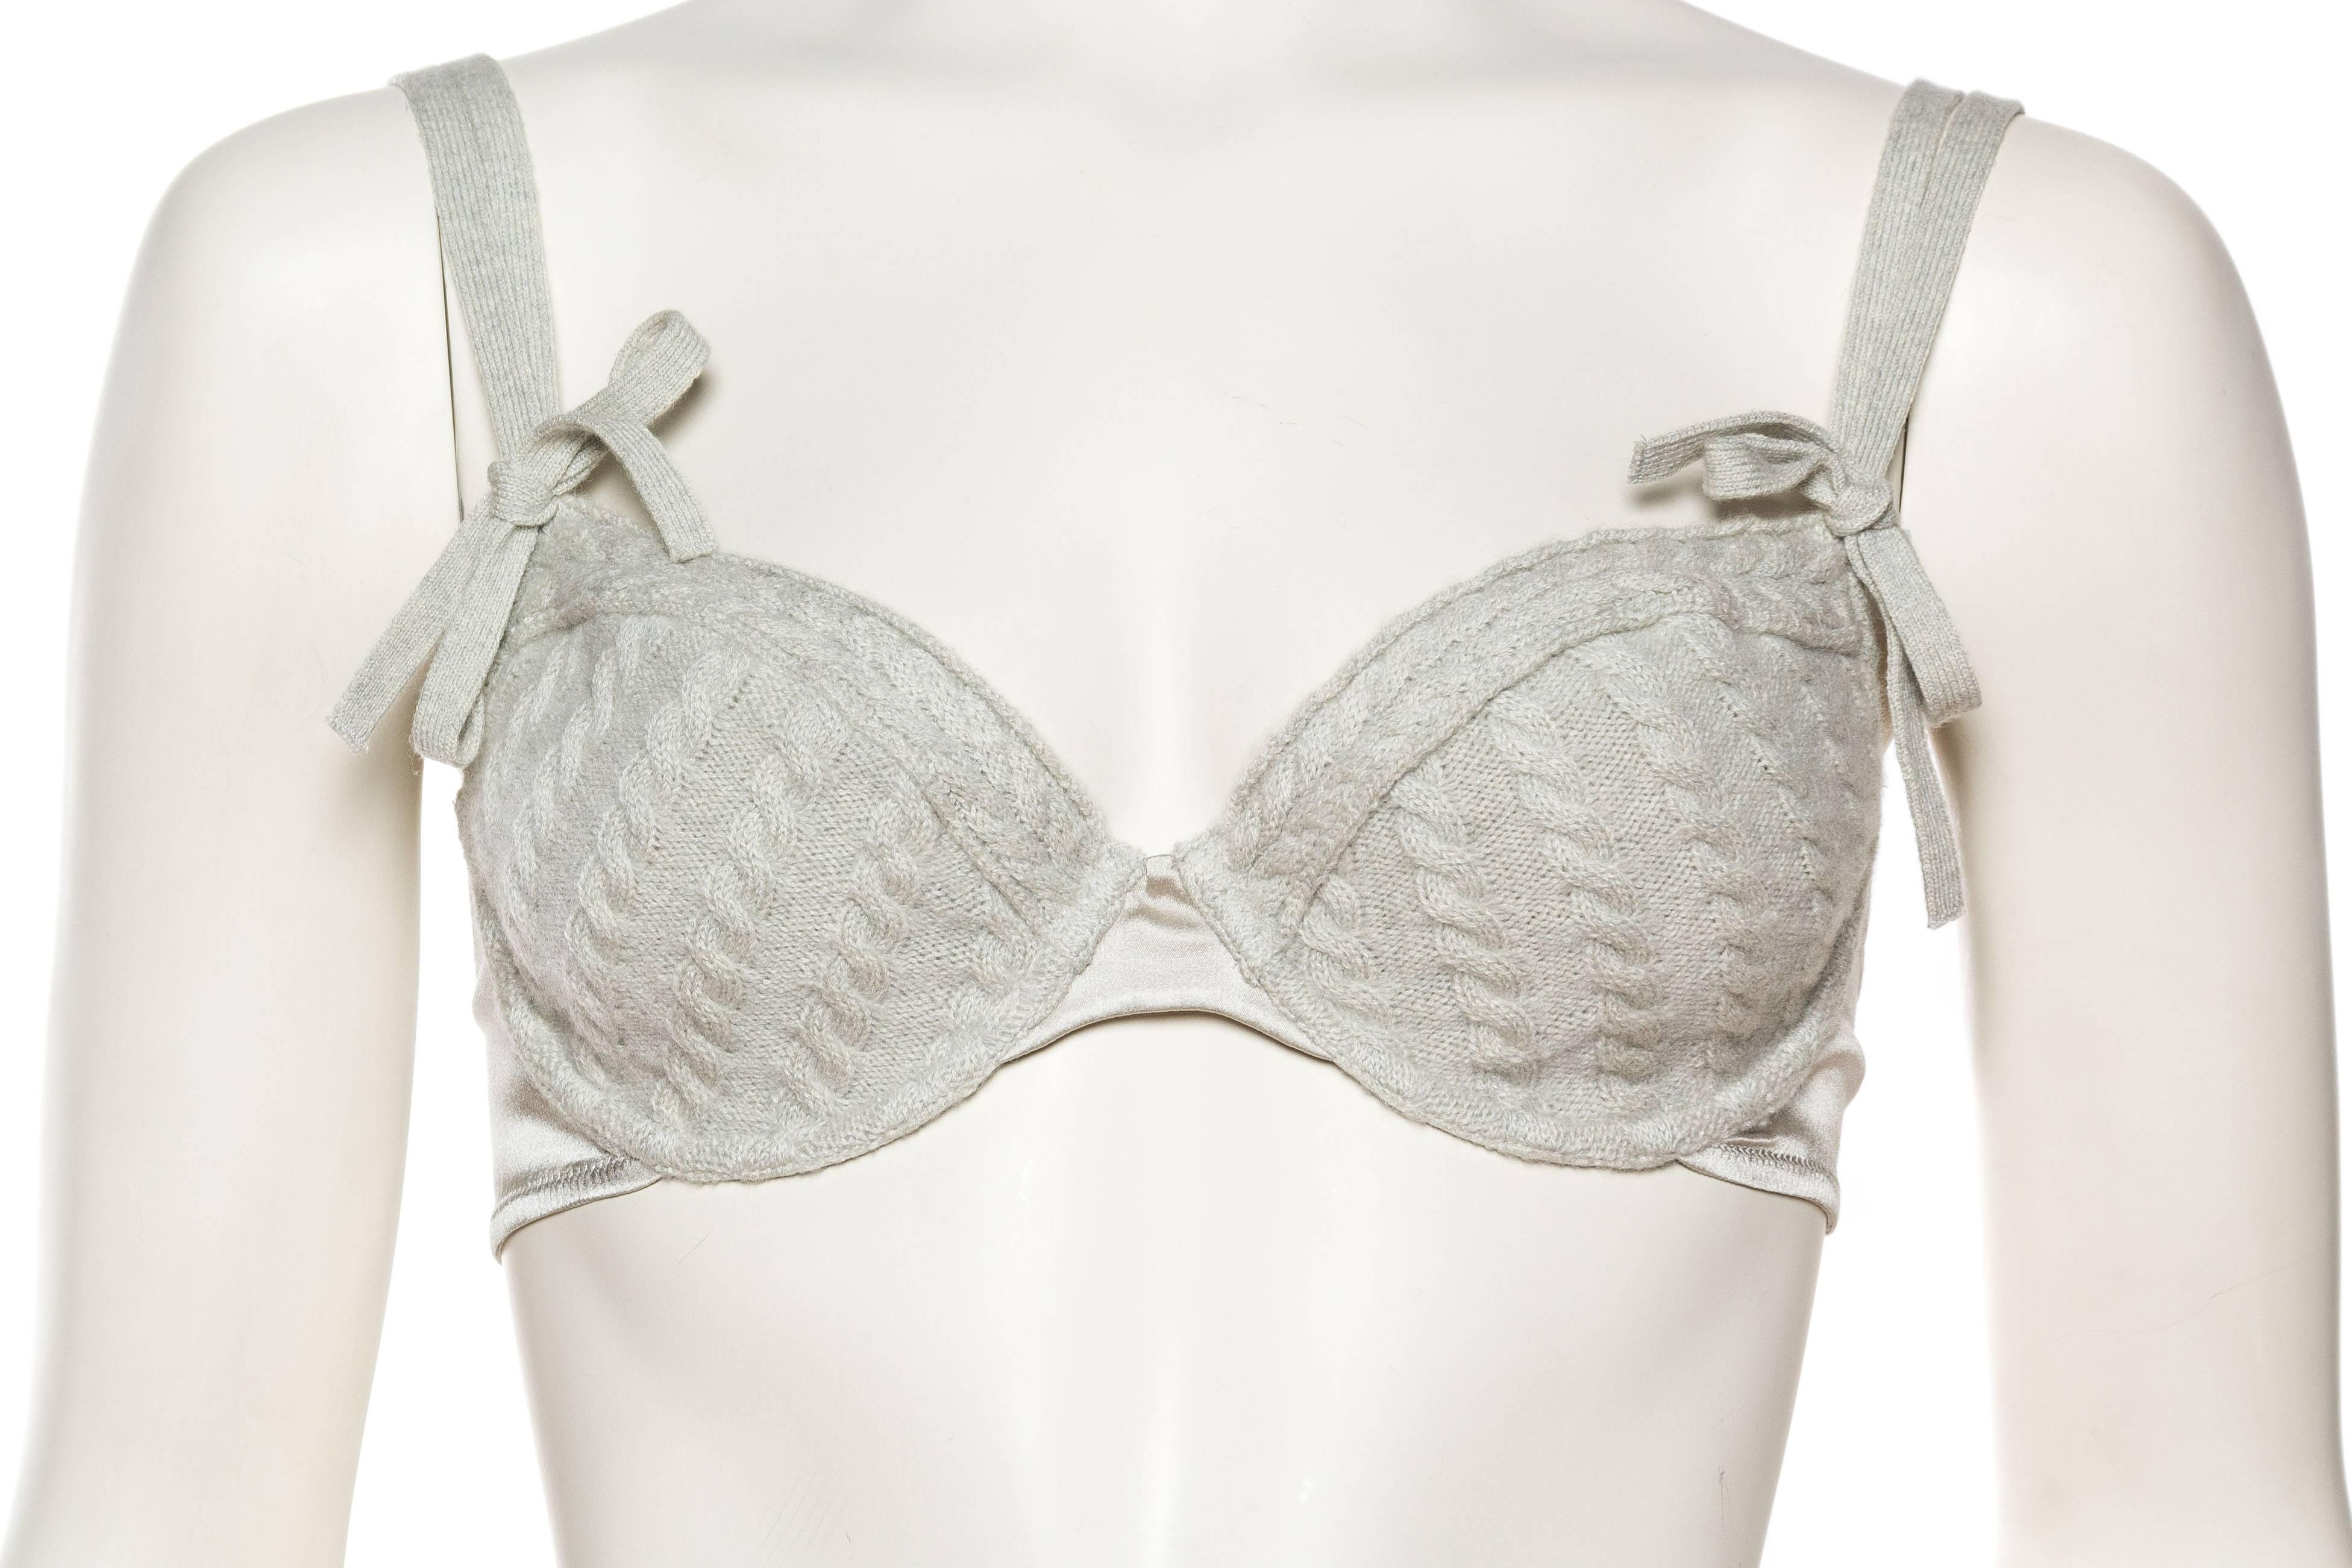 Extremely hard to find these bras which work as tops as they are such a hot trend right now. Works great by it's self or layered over a fine knit sweater. An awesome piece for styling. 